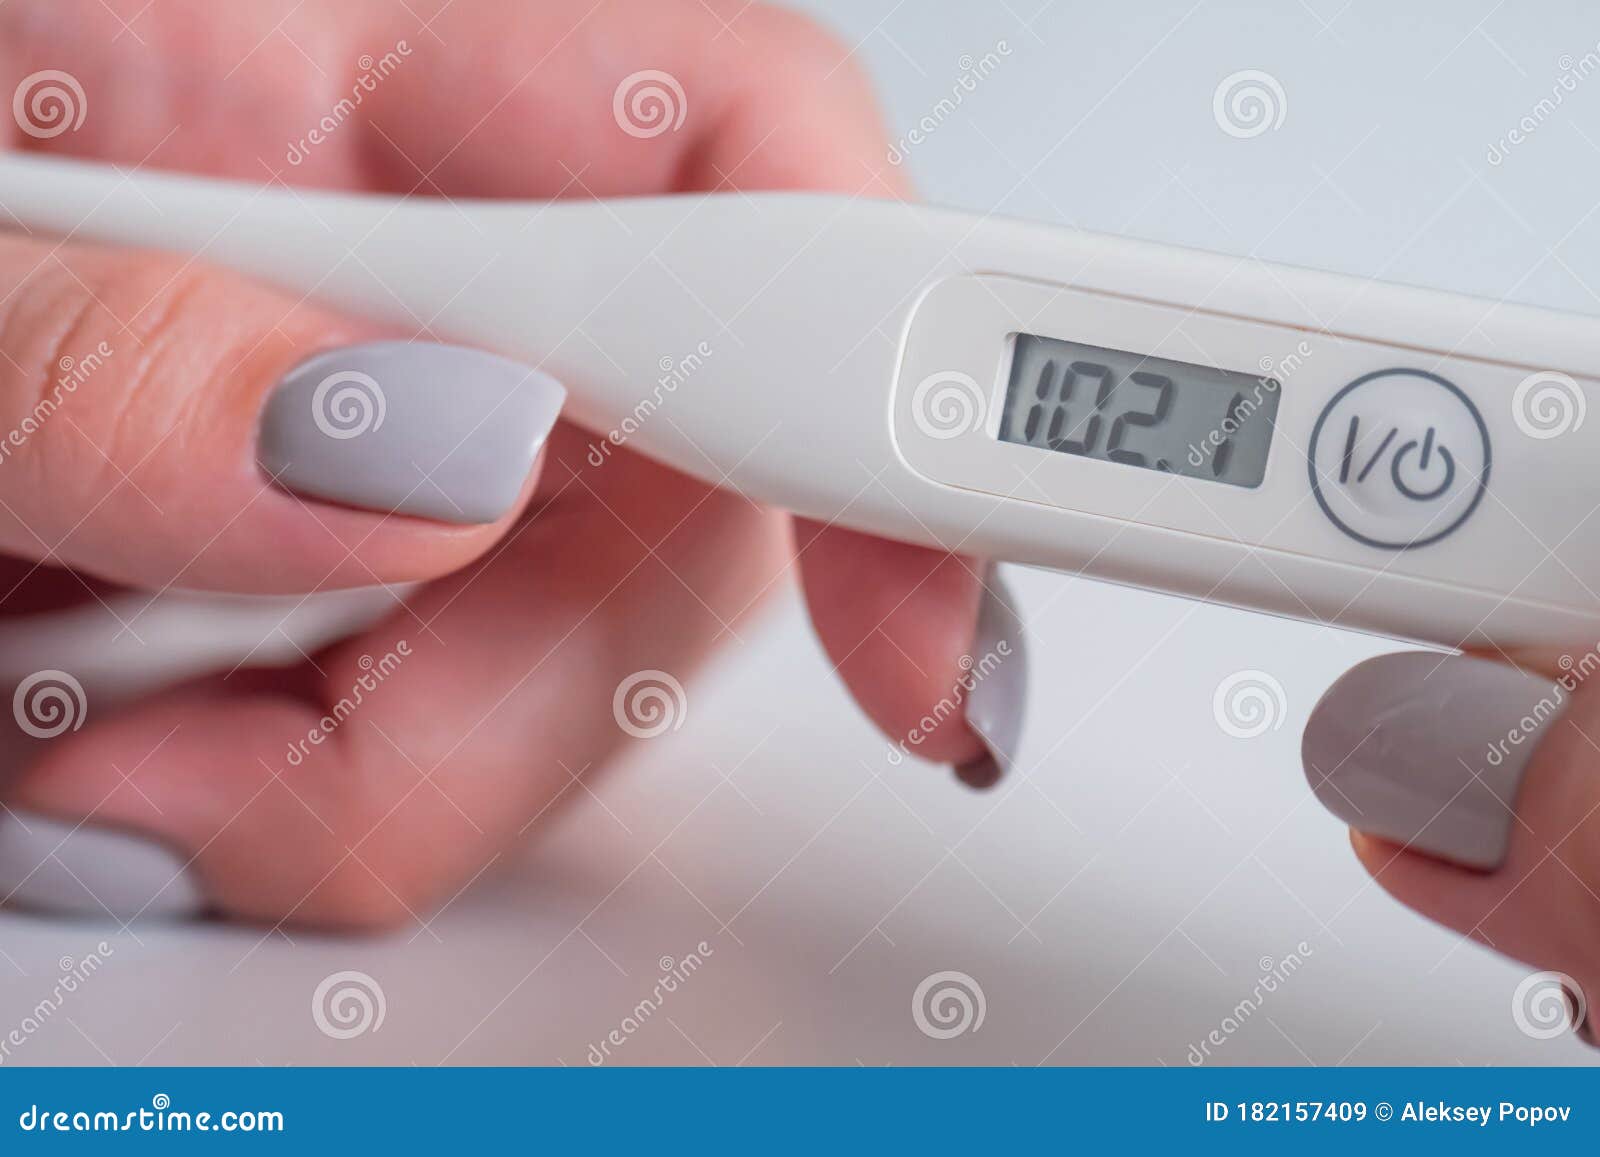 https://thumbs.dreamstime.com/z/close-up-woman-holding-digital-medical-thermometer-high-temperature-hands-white-selective-focus-healthcare-measurement-182157409.jpg